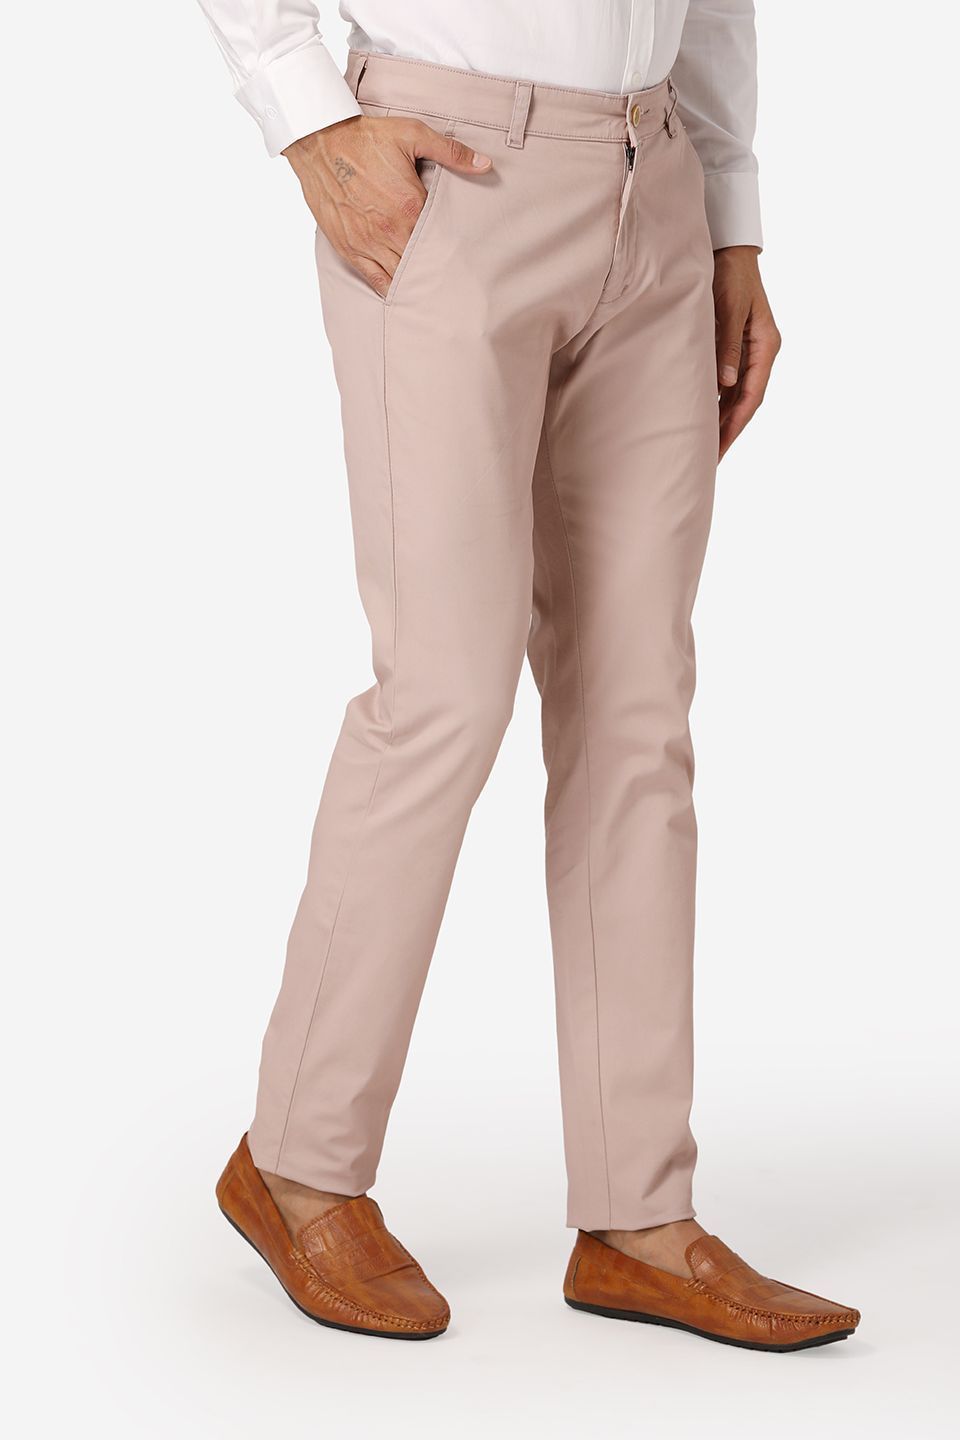 Wintage Men's Beige Regular Fit Chinos 100% Cotton Twill Stretch Trousers